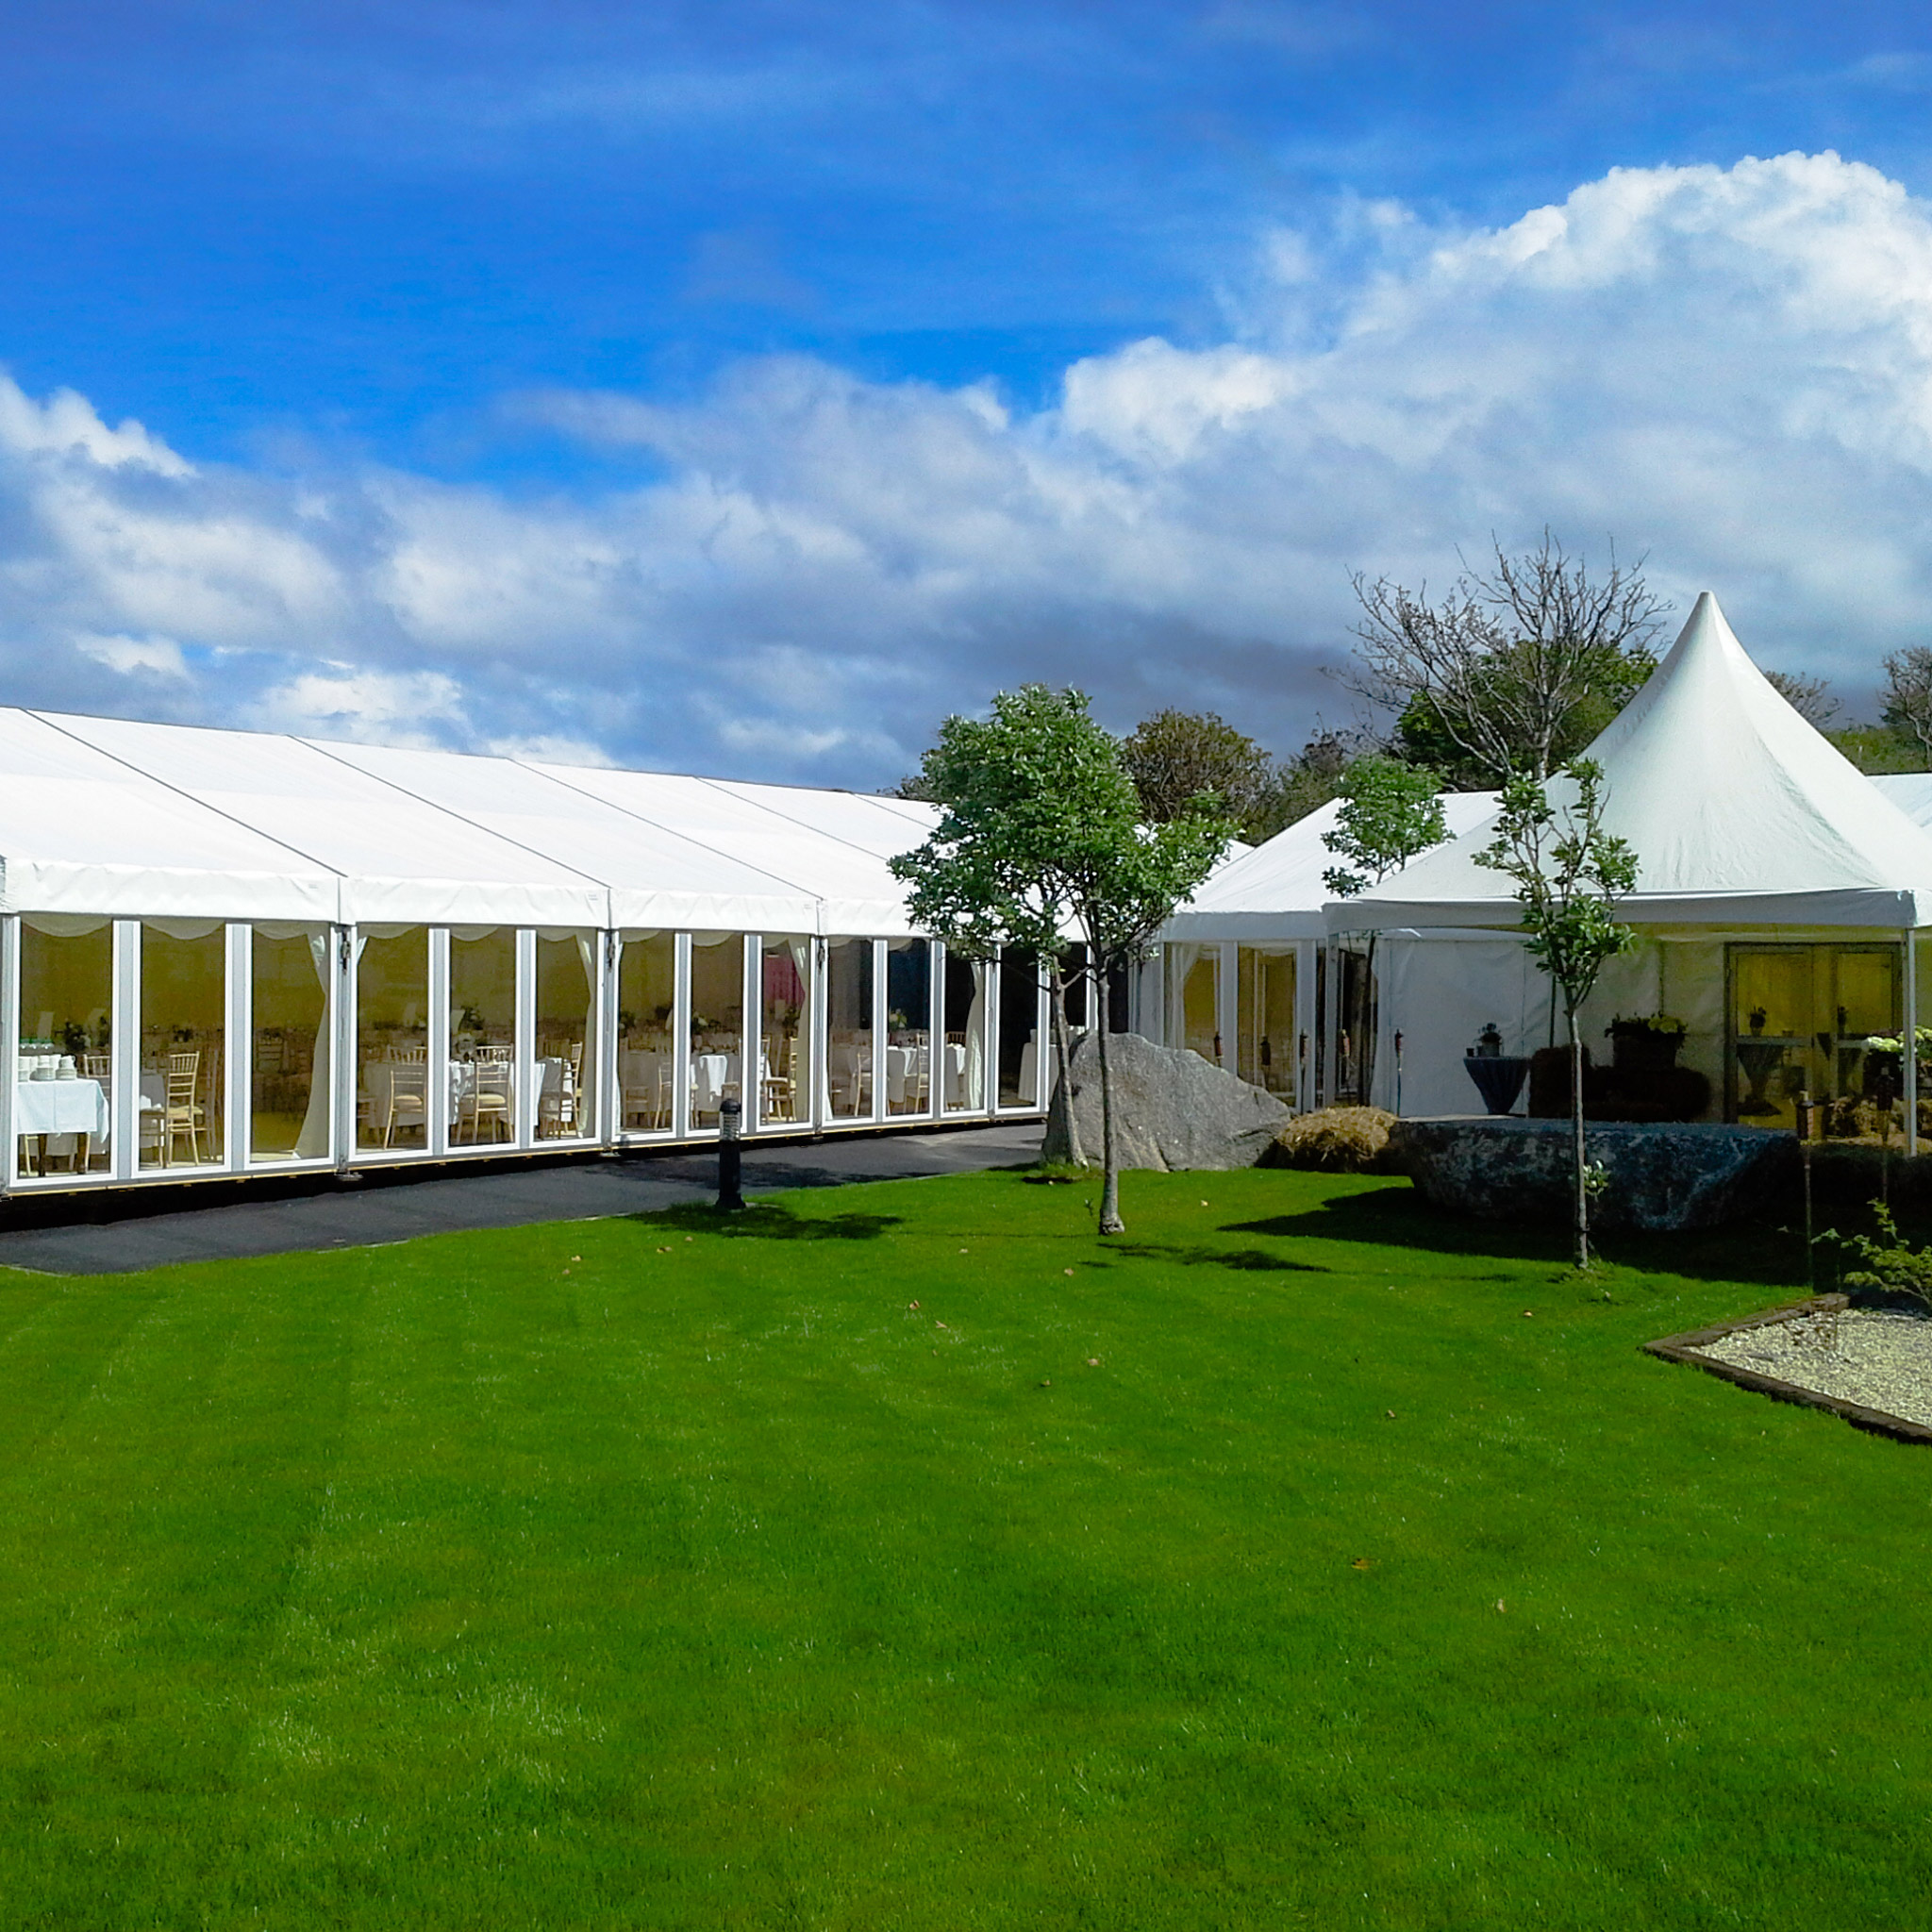 A wedding marquee adjacent to green grass photographed in daylight